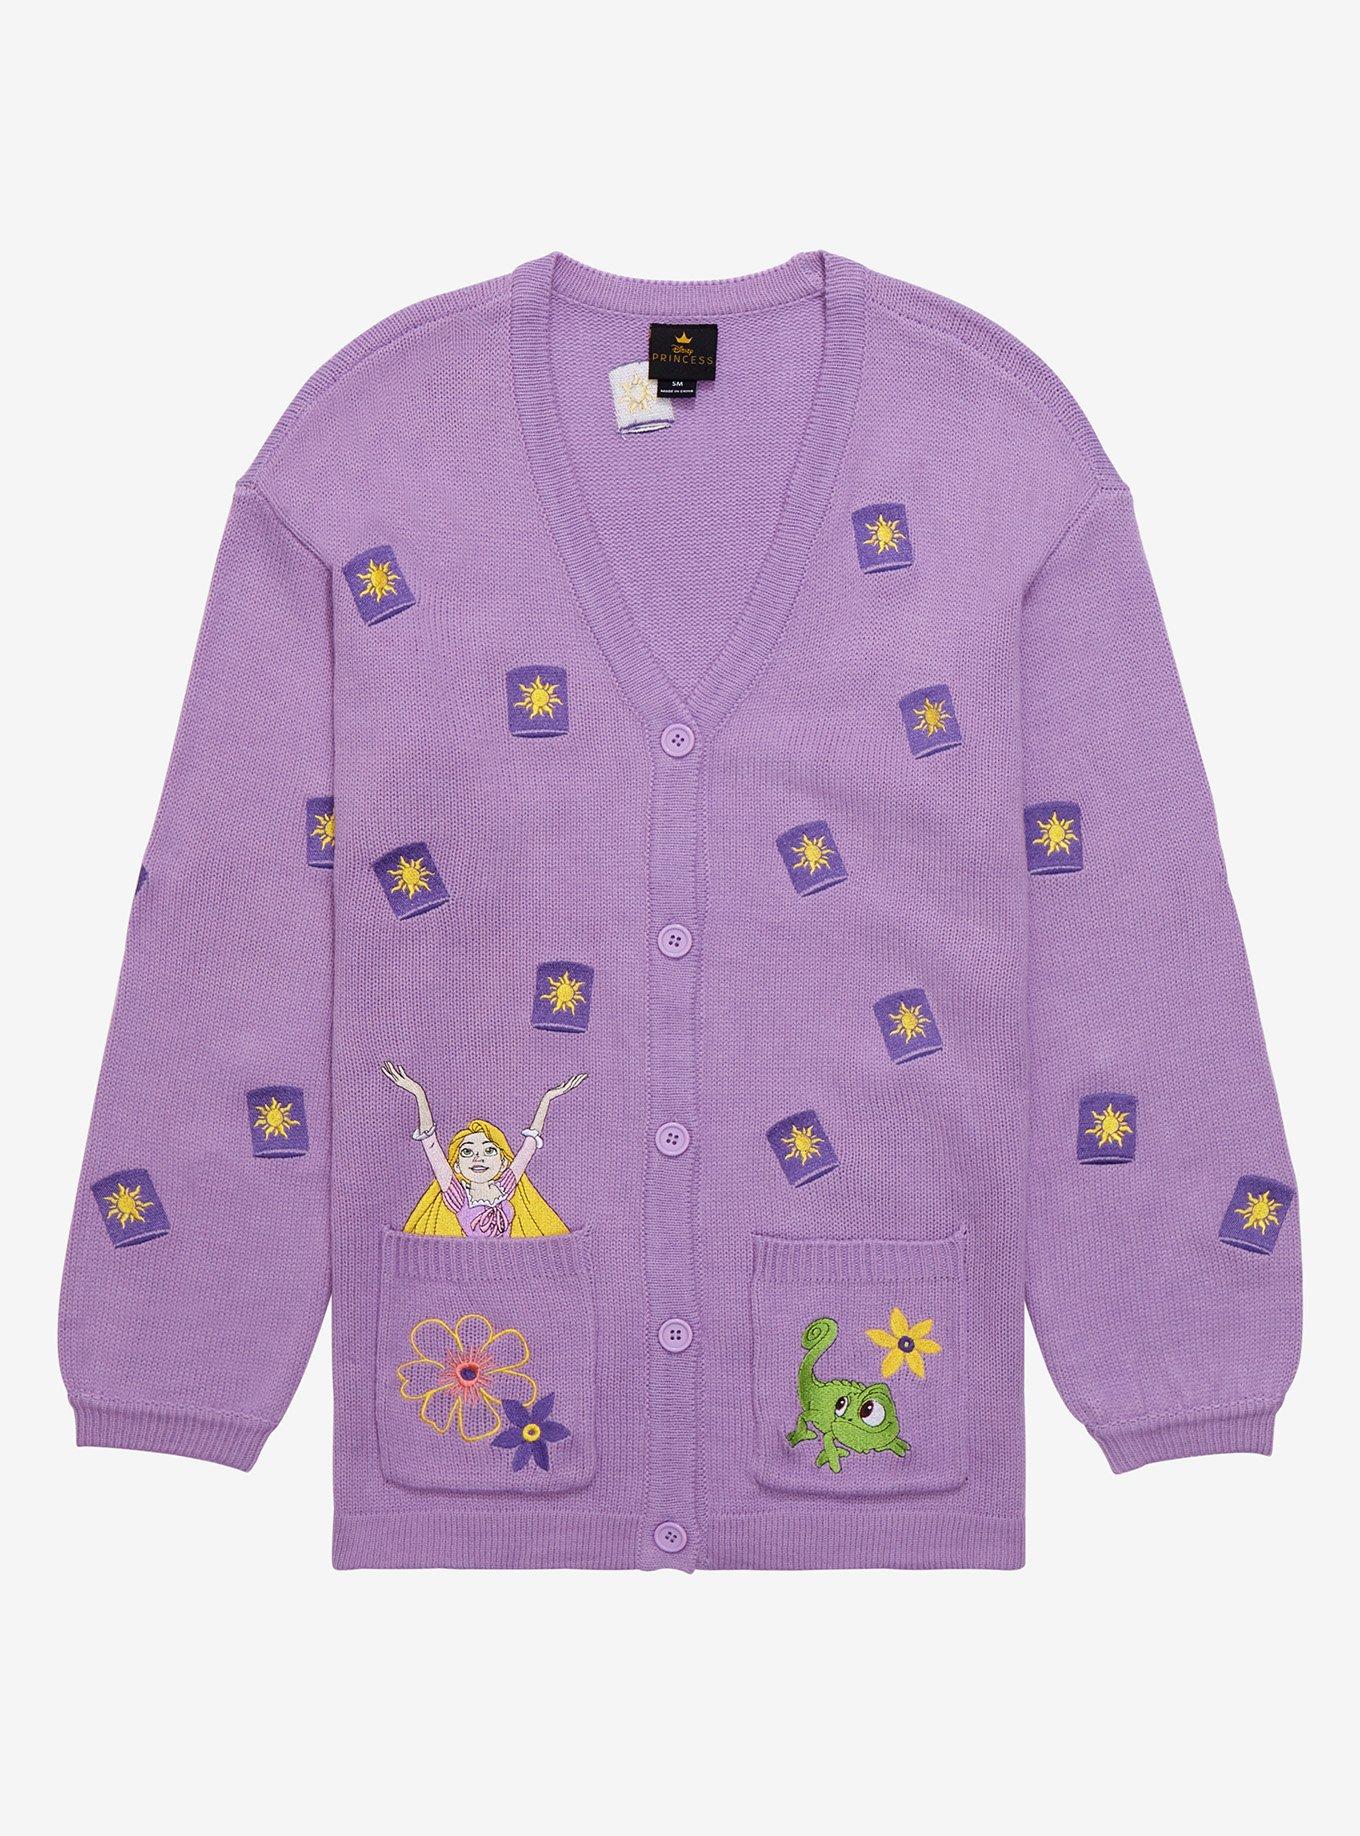 Disney Tangled Rapunzel & Pascal Floating Lanterns Women's Cardigan - BoxLunch Exclusive, LILAC, hi-res